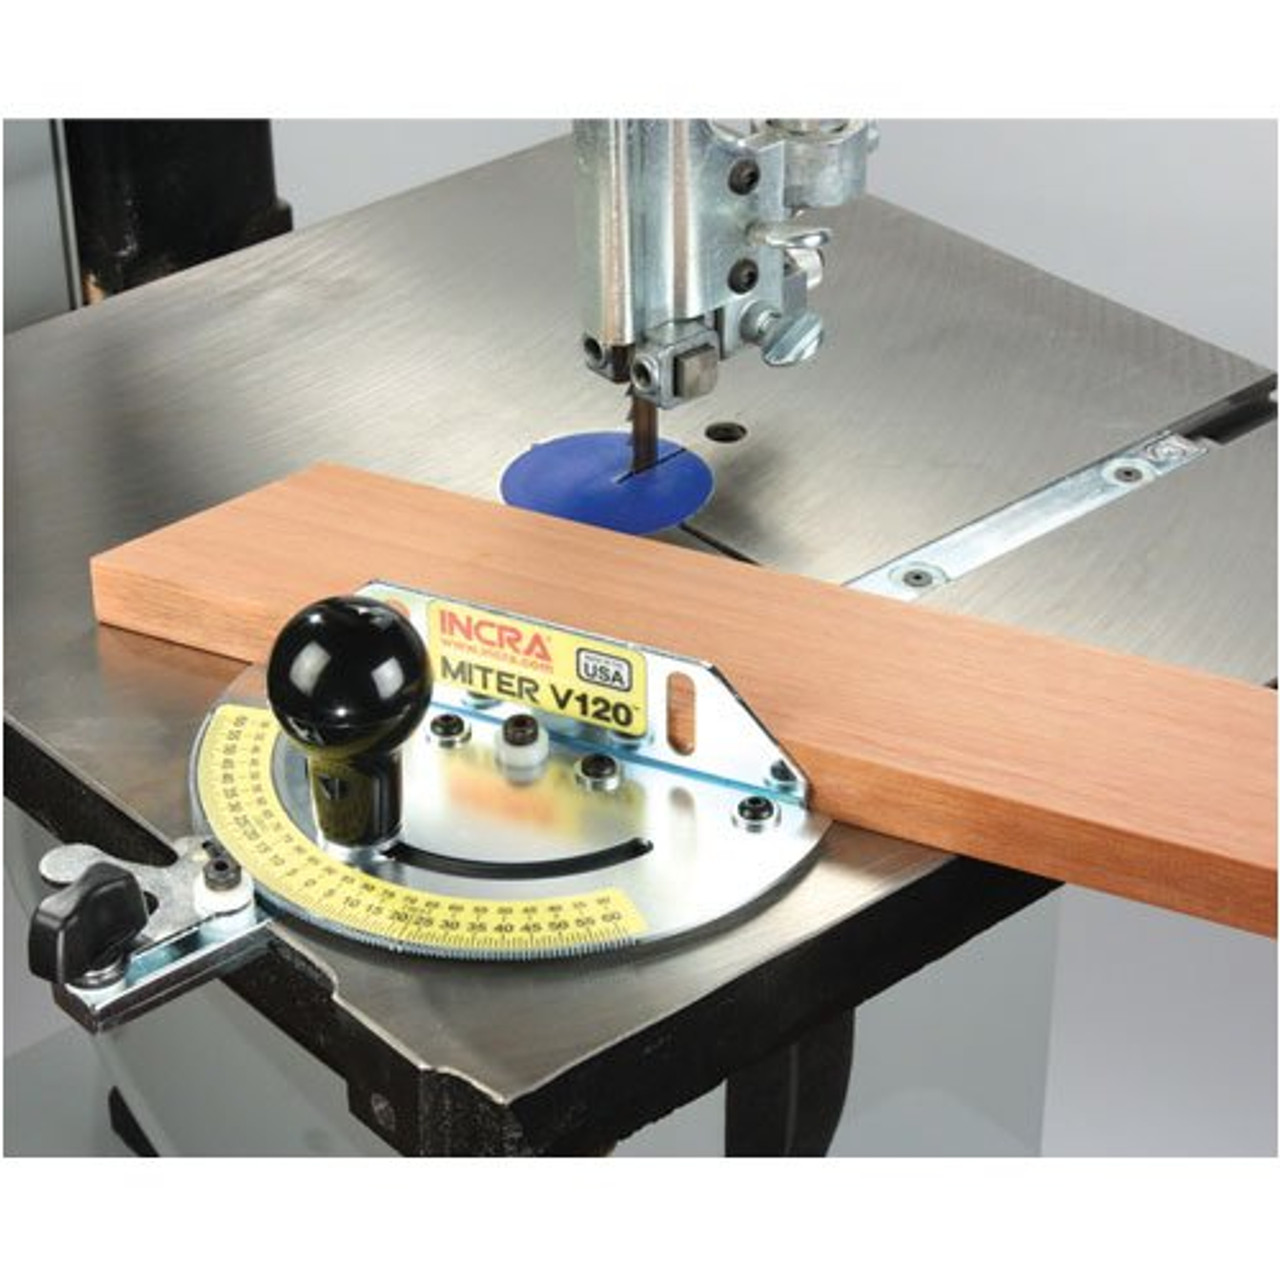 INCRA MiterV120 Miter Gauge for Table & Band Saws, Router Tables & Sanders